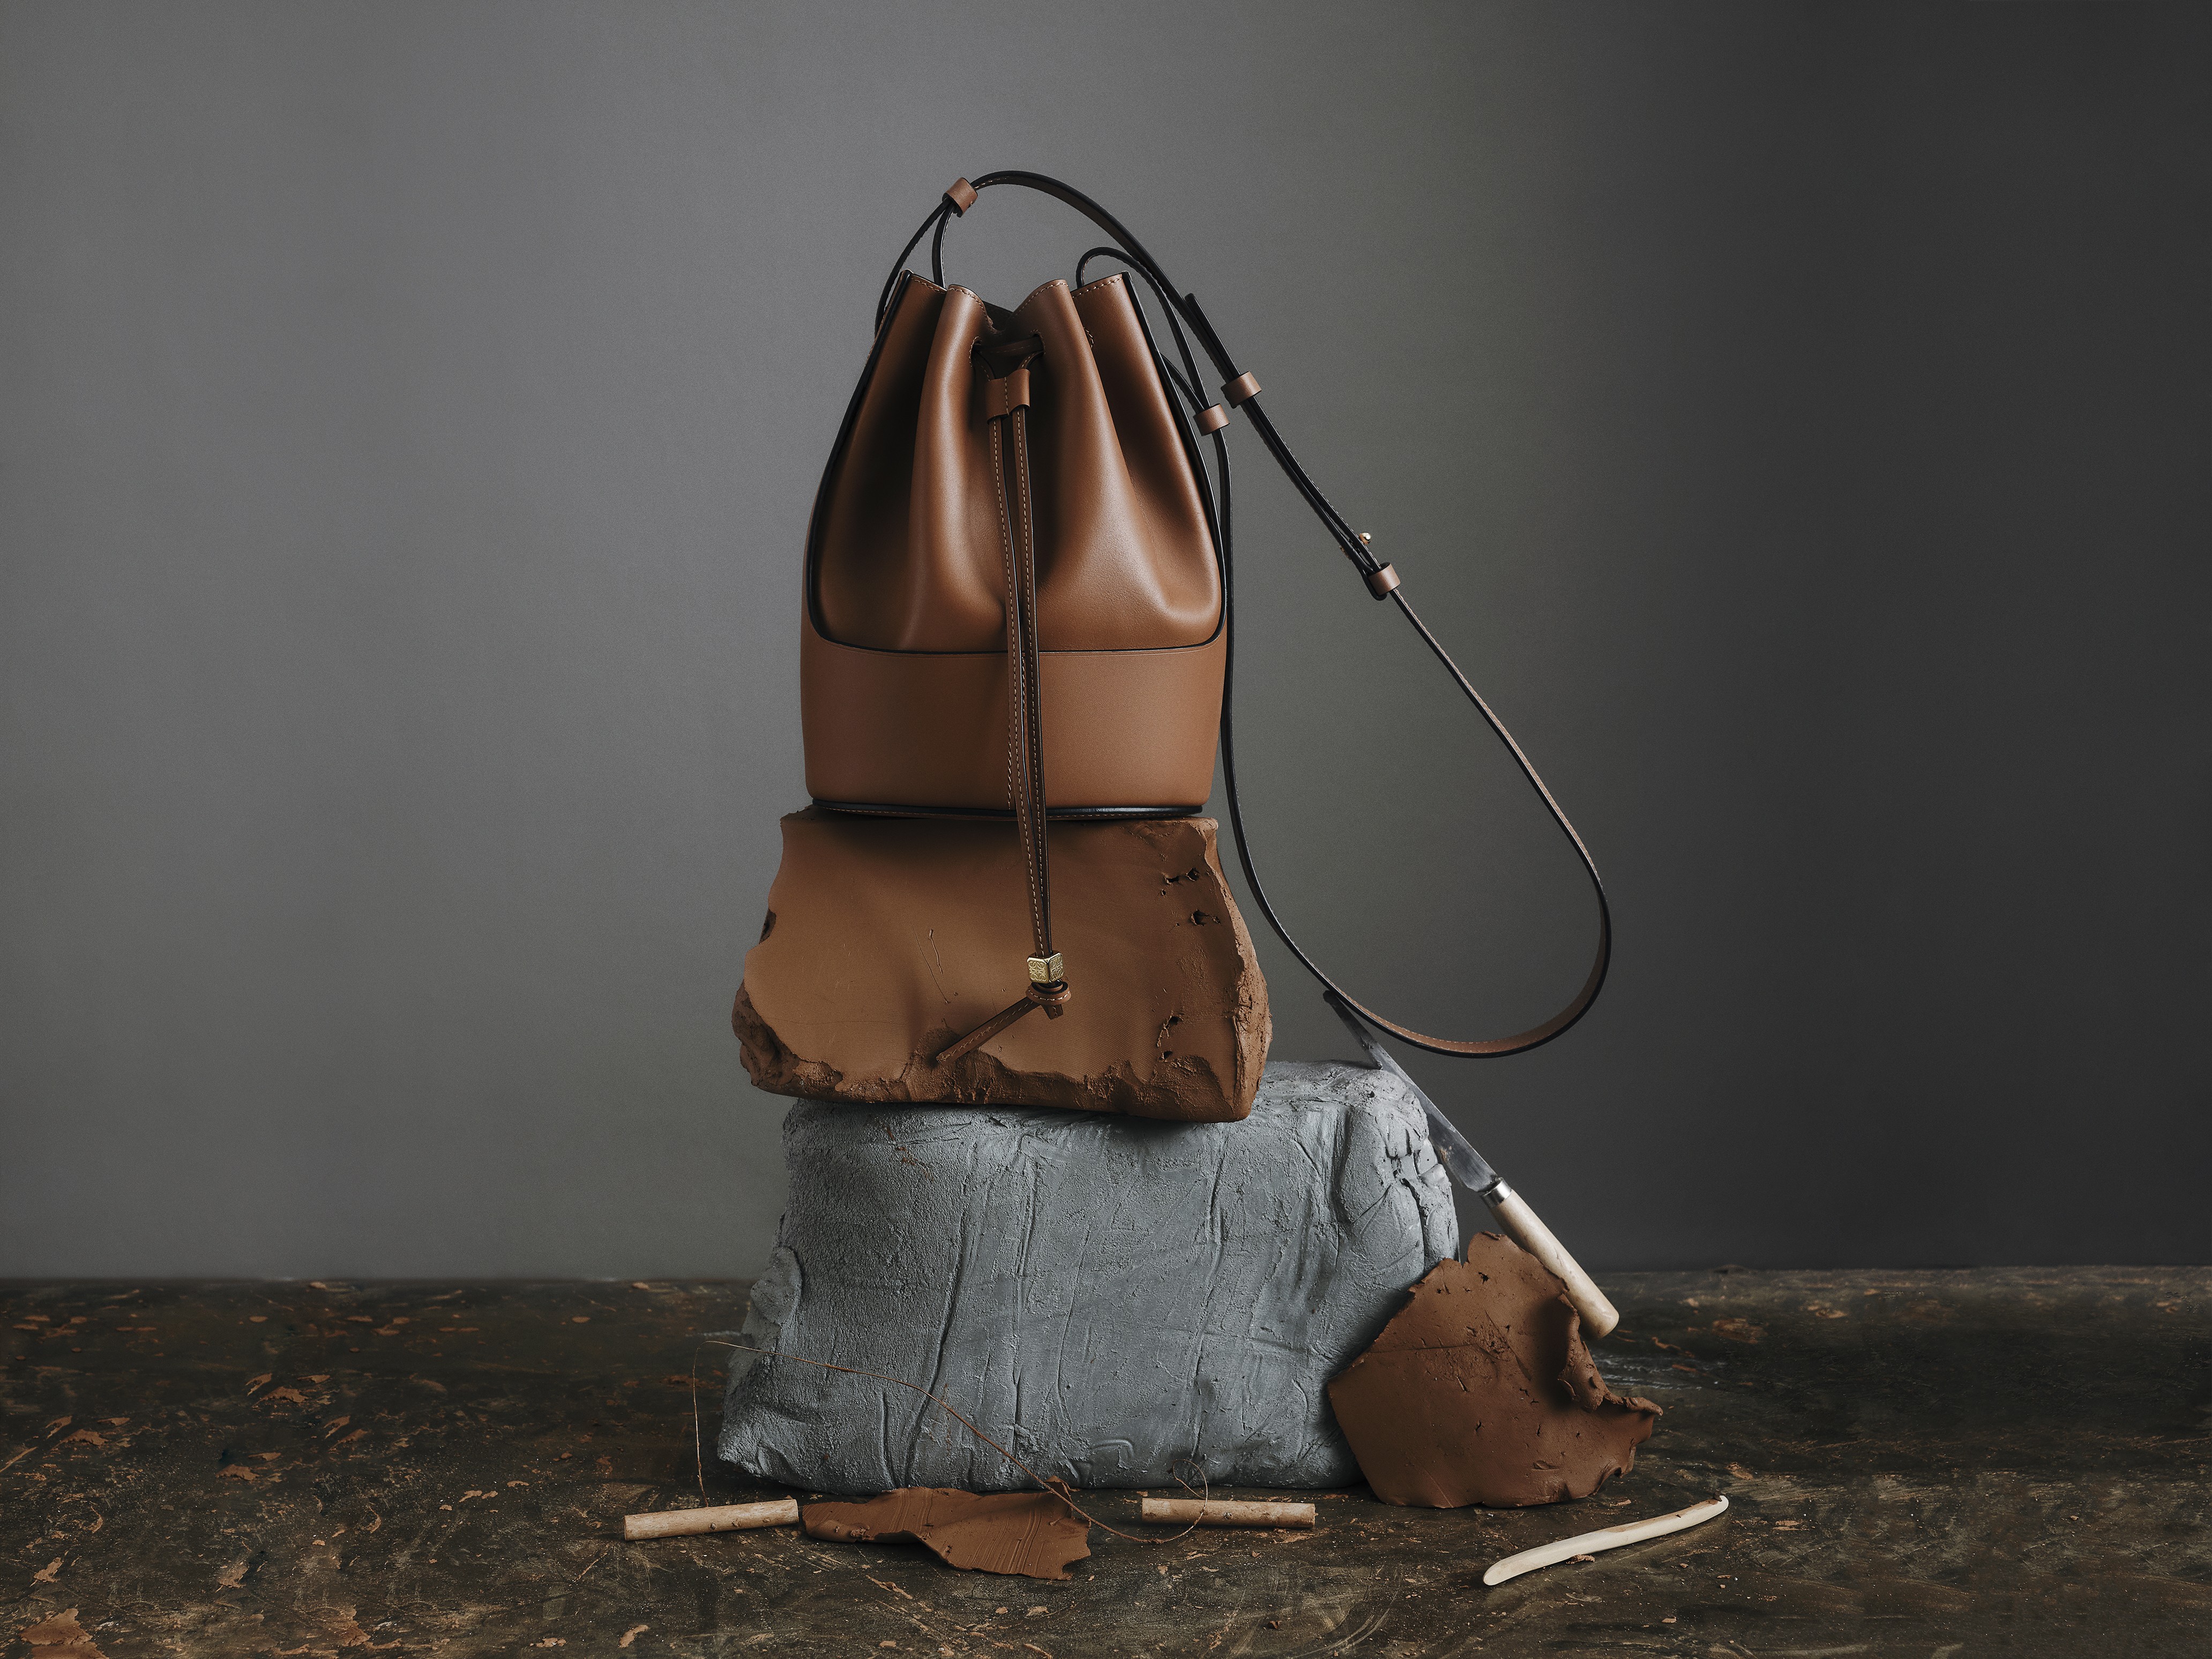 Balloon small two-tone leather bucket bag